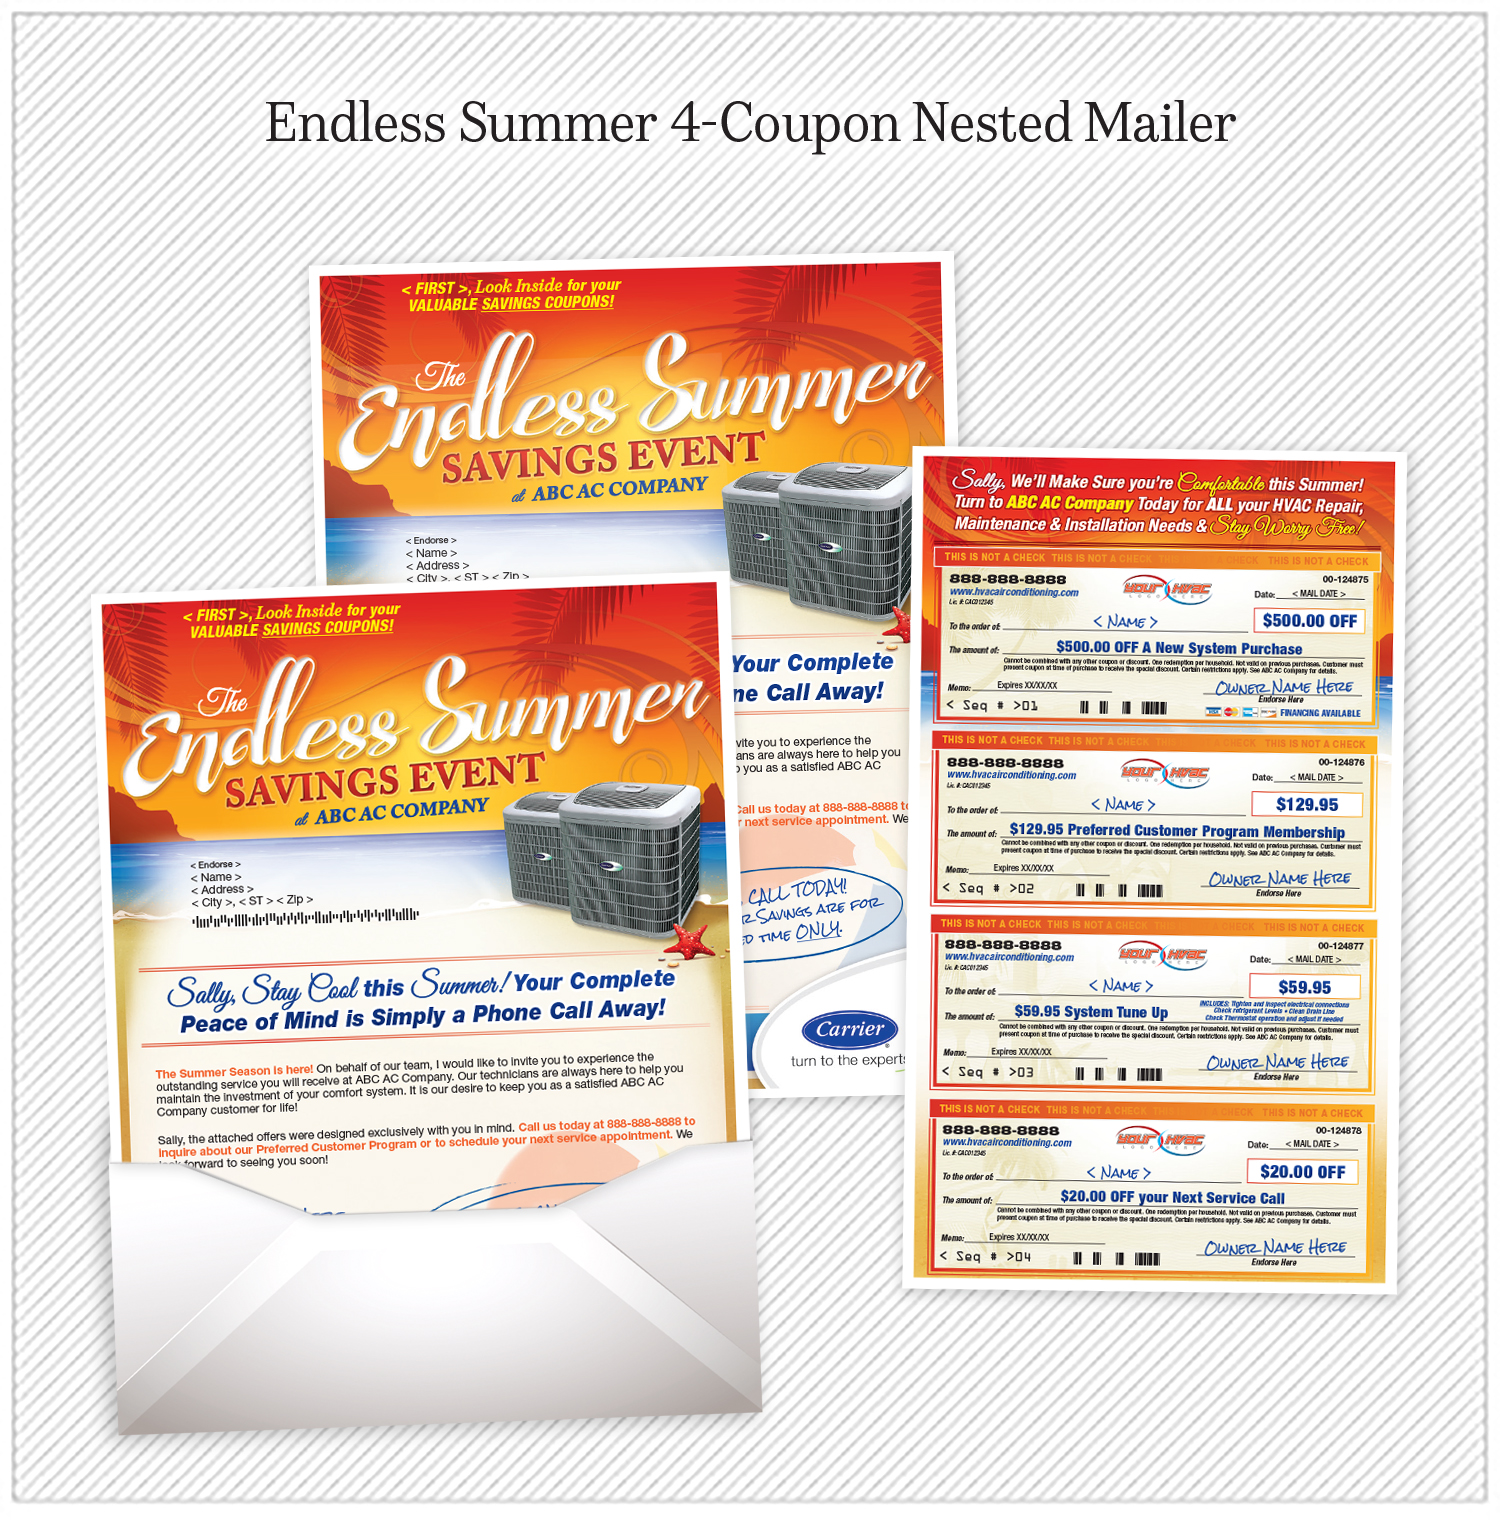 Summer 4 coupon nested mailer